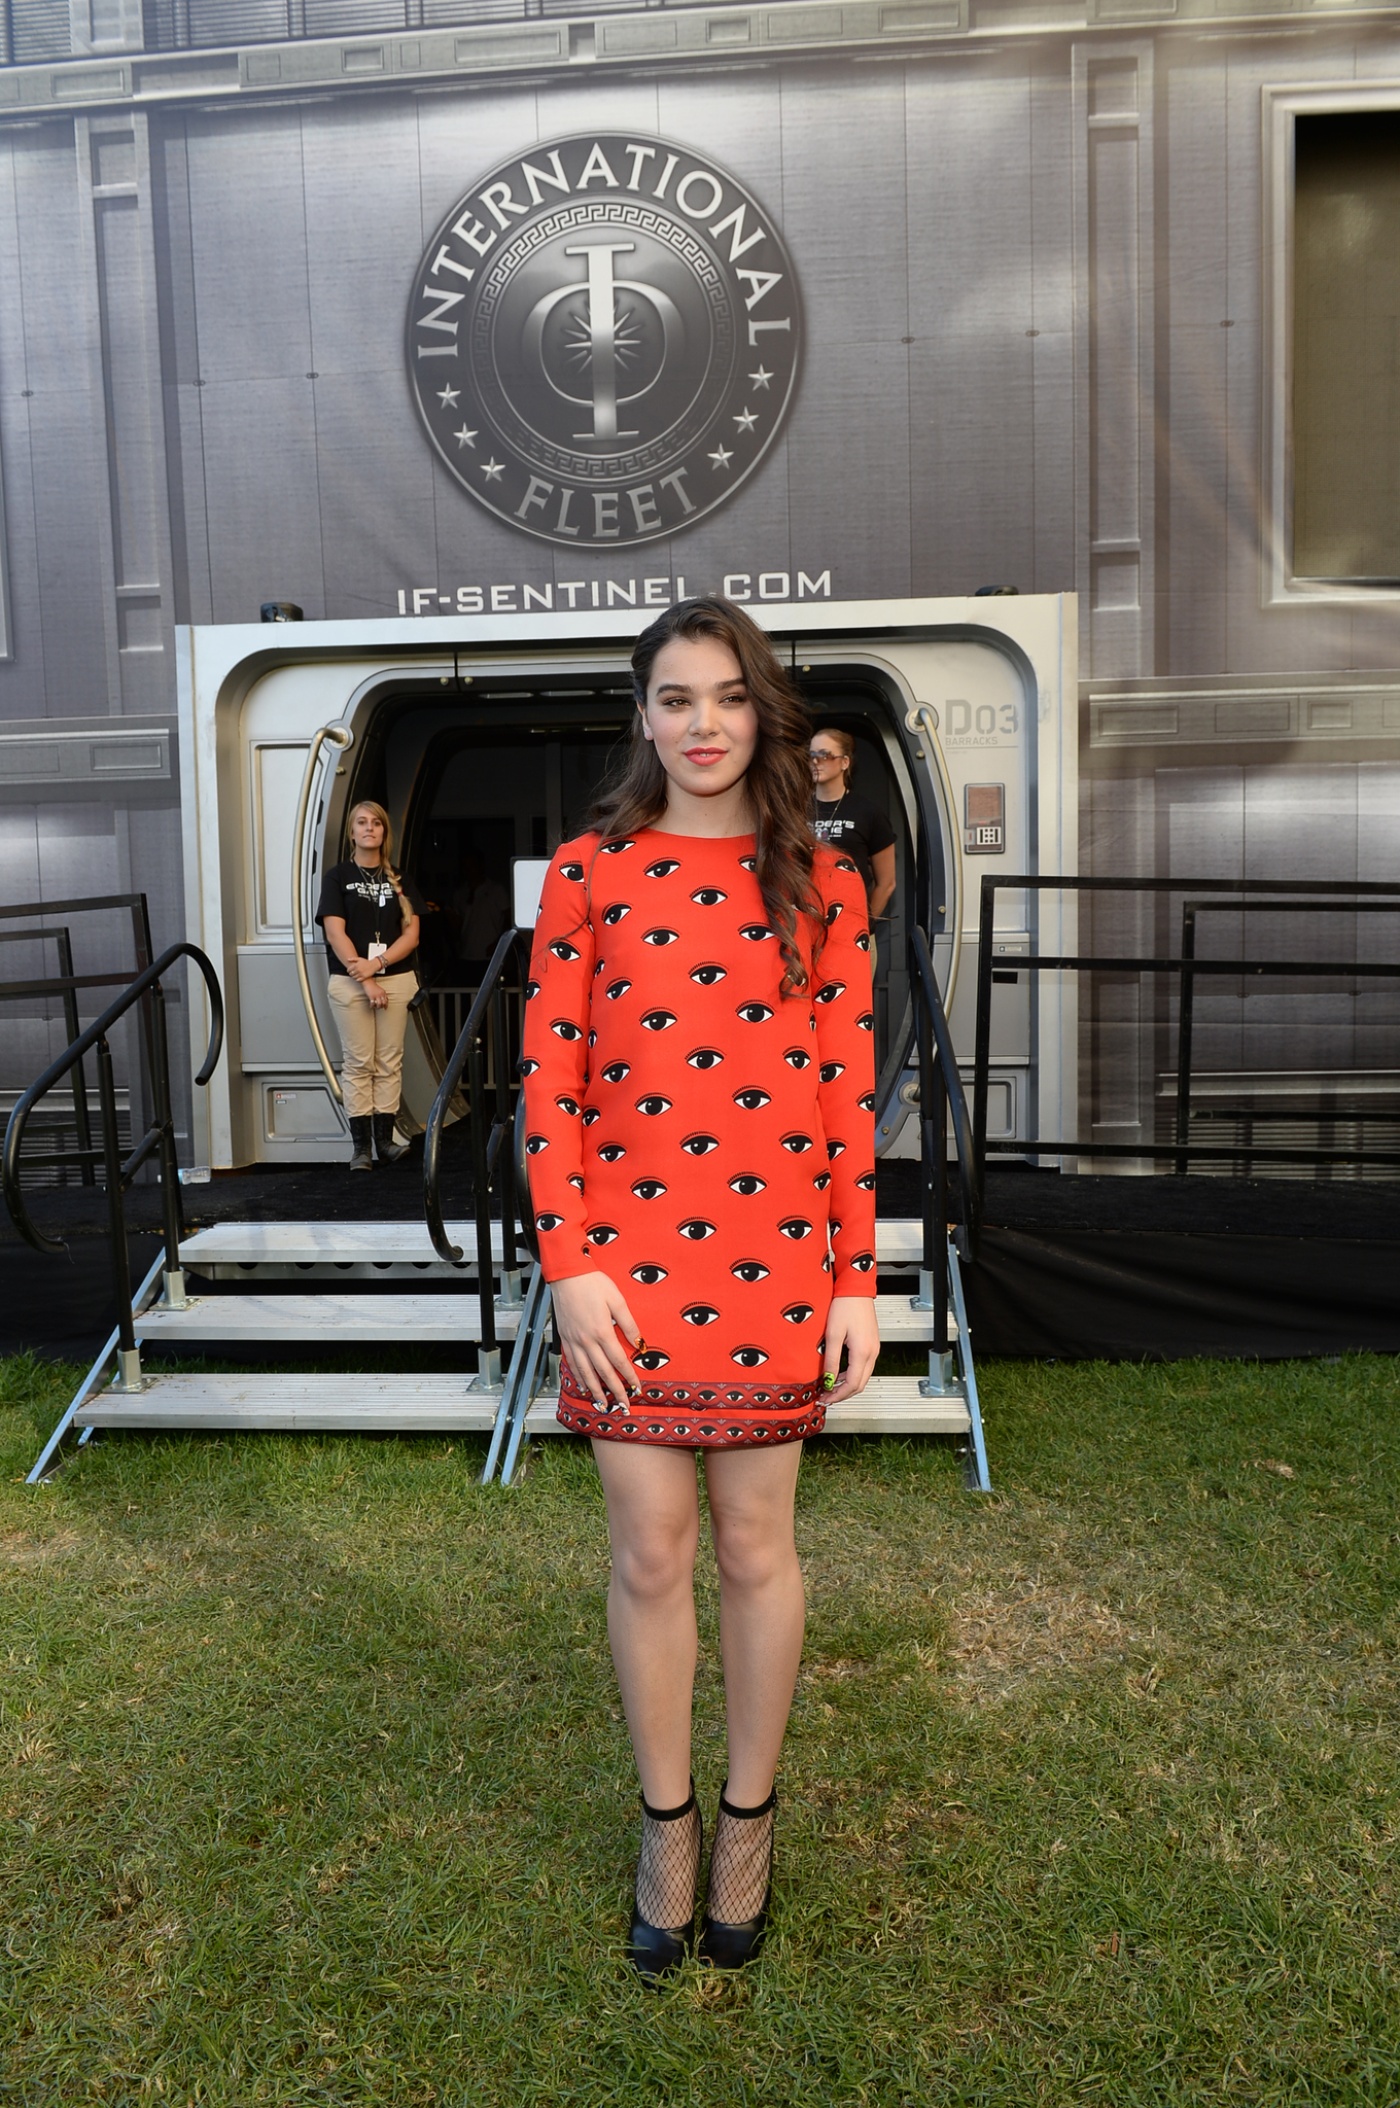 Hailee Steinfield at Ender's Game Event submitted by Canary + Rook